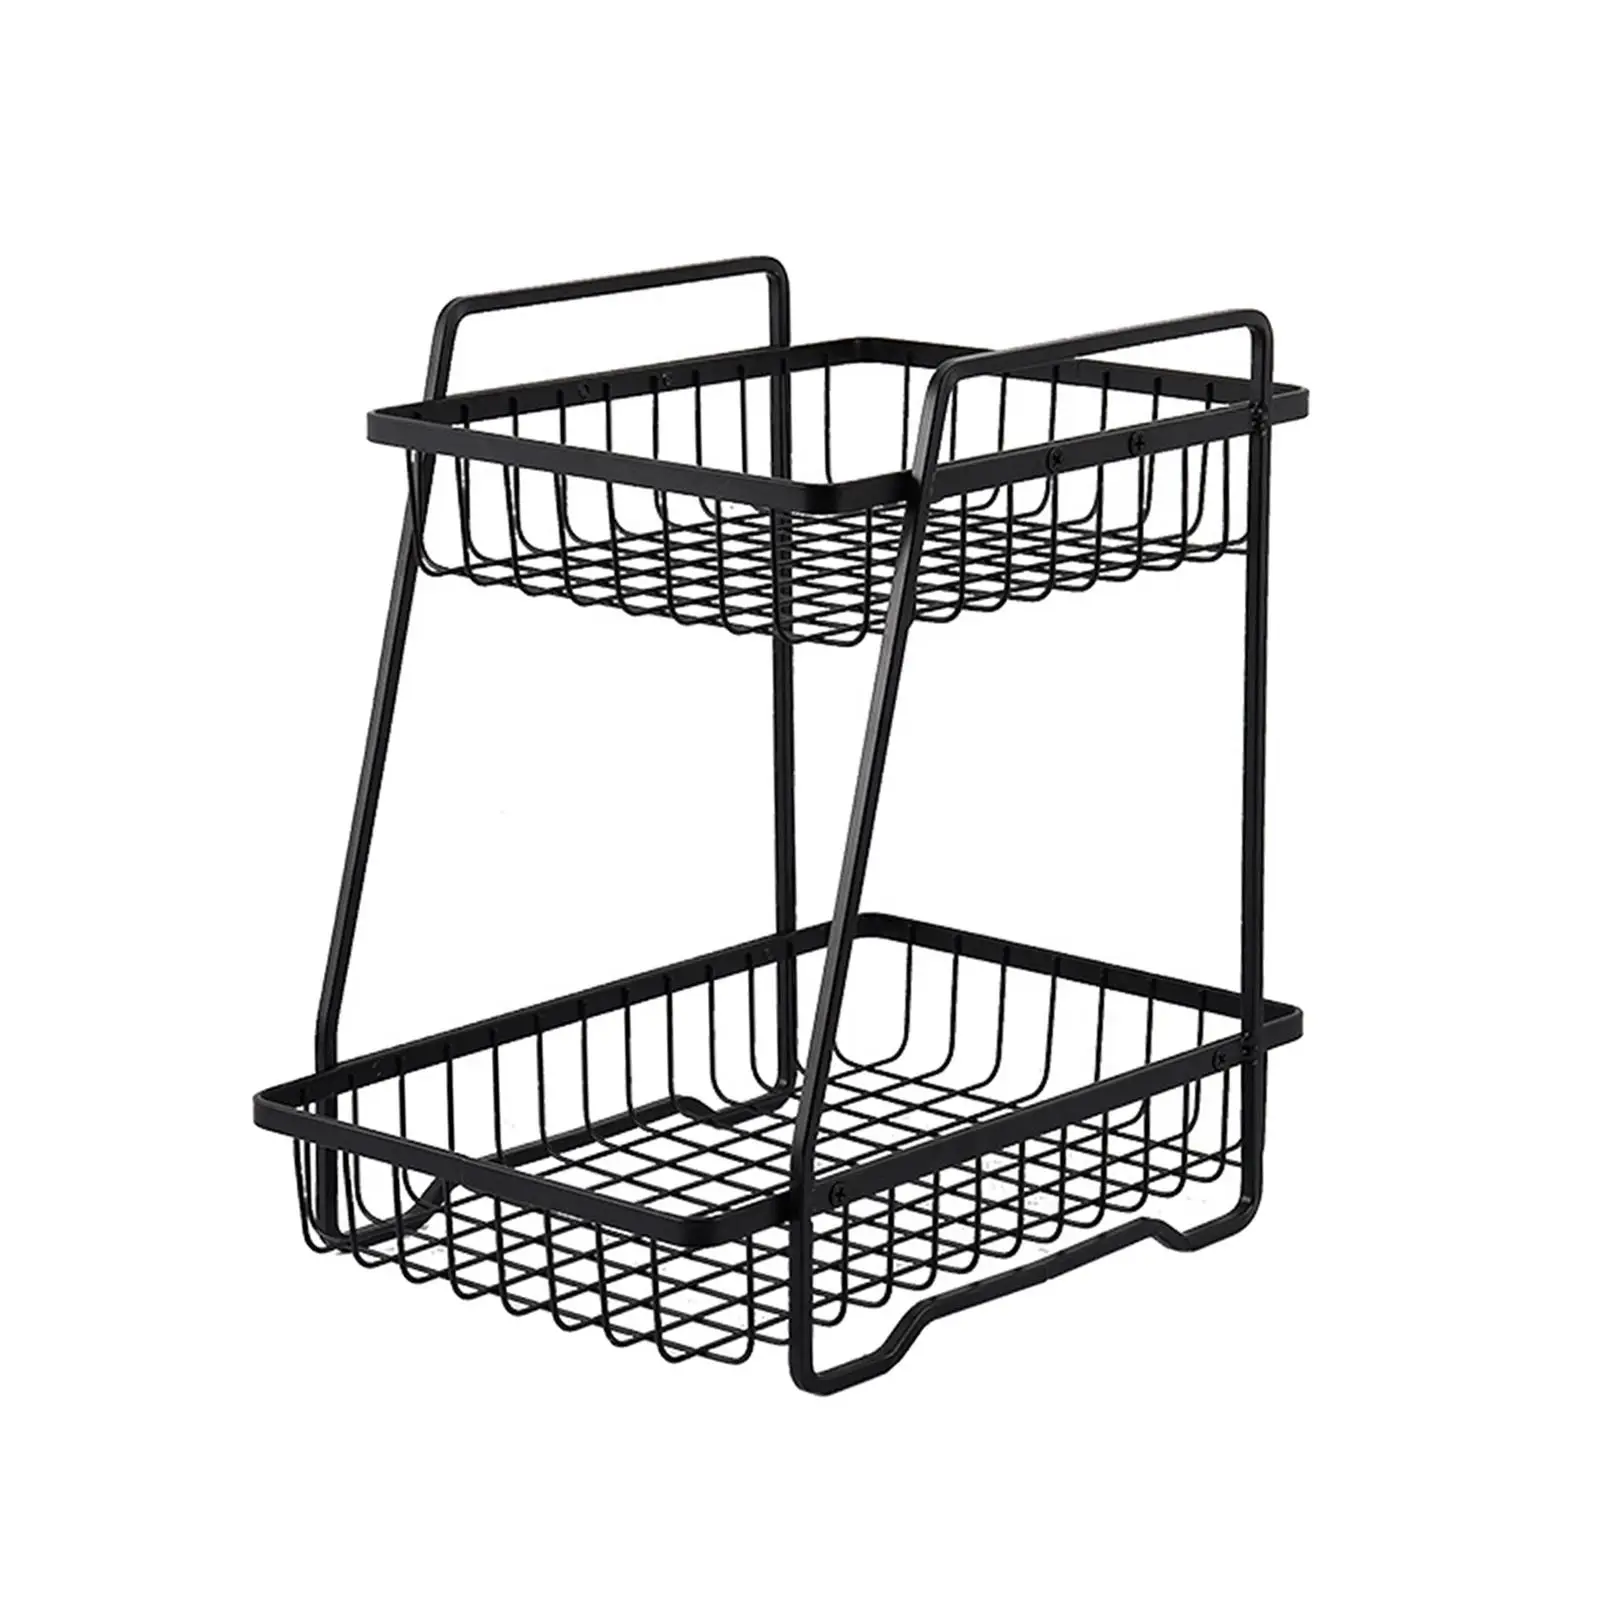 Fruit Bowl Storage Stand 2 Tired Multifunctional Kitchen Bathroom Wire Basket with Handle Rectangle Food Storage Basket